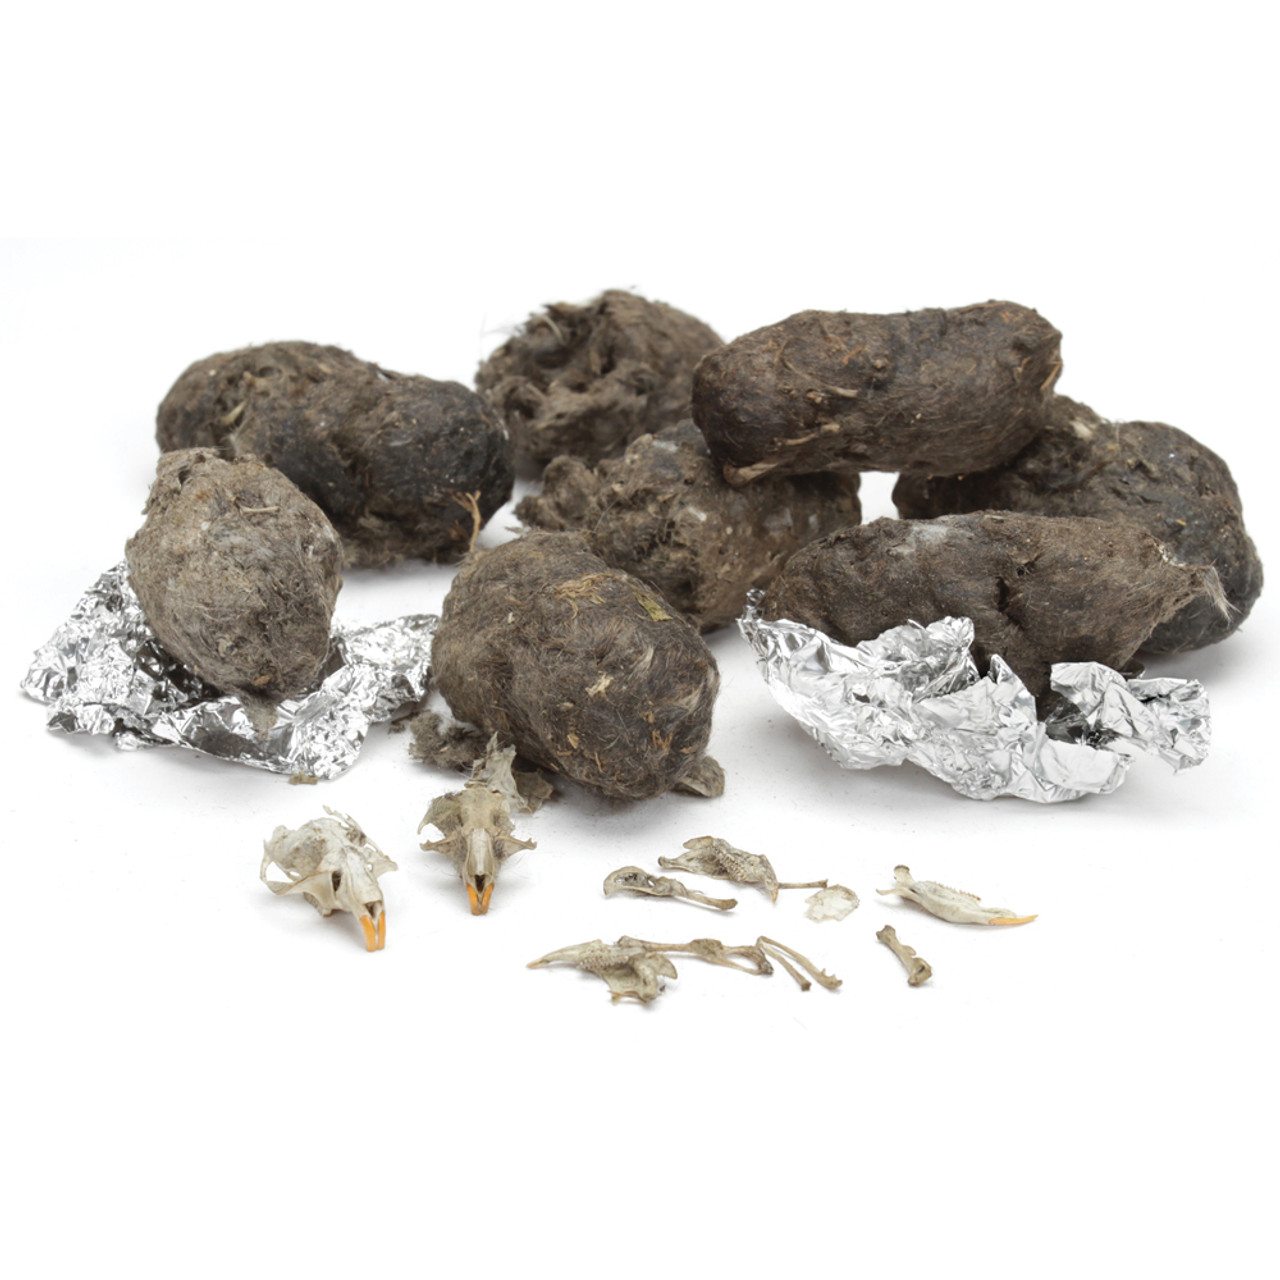 CANADA ONLY - 10 Medium Owl Pellets - Includes Shipping